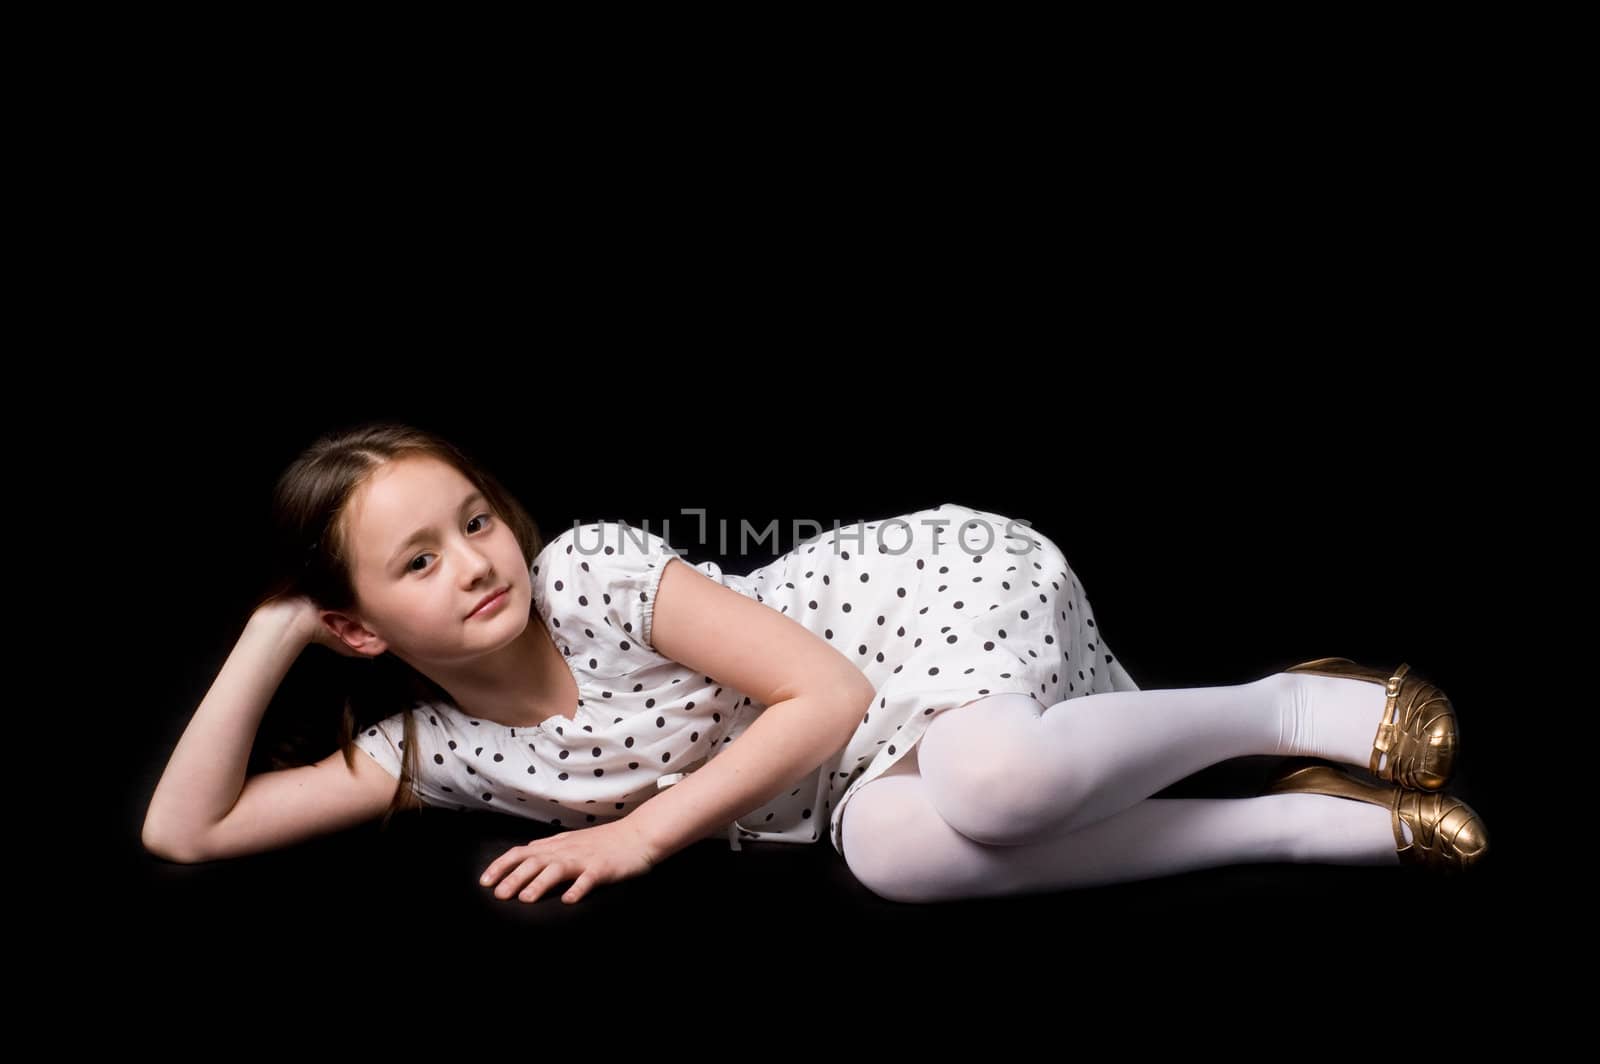 The girl in studio on a black background